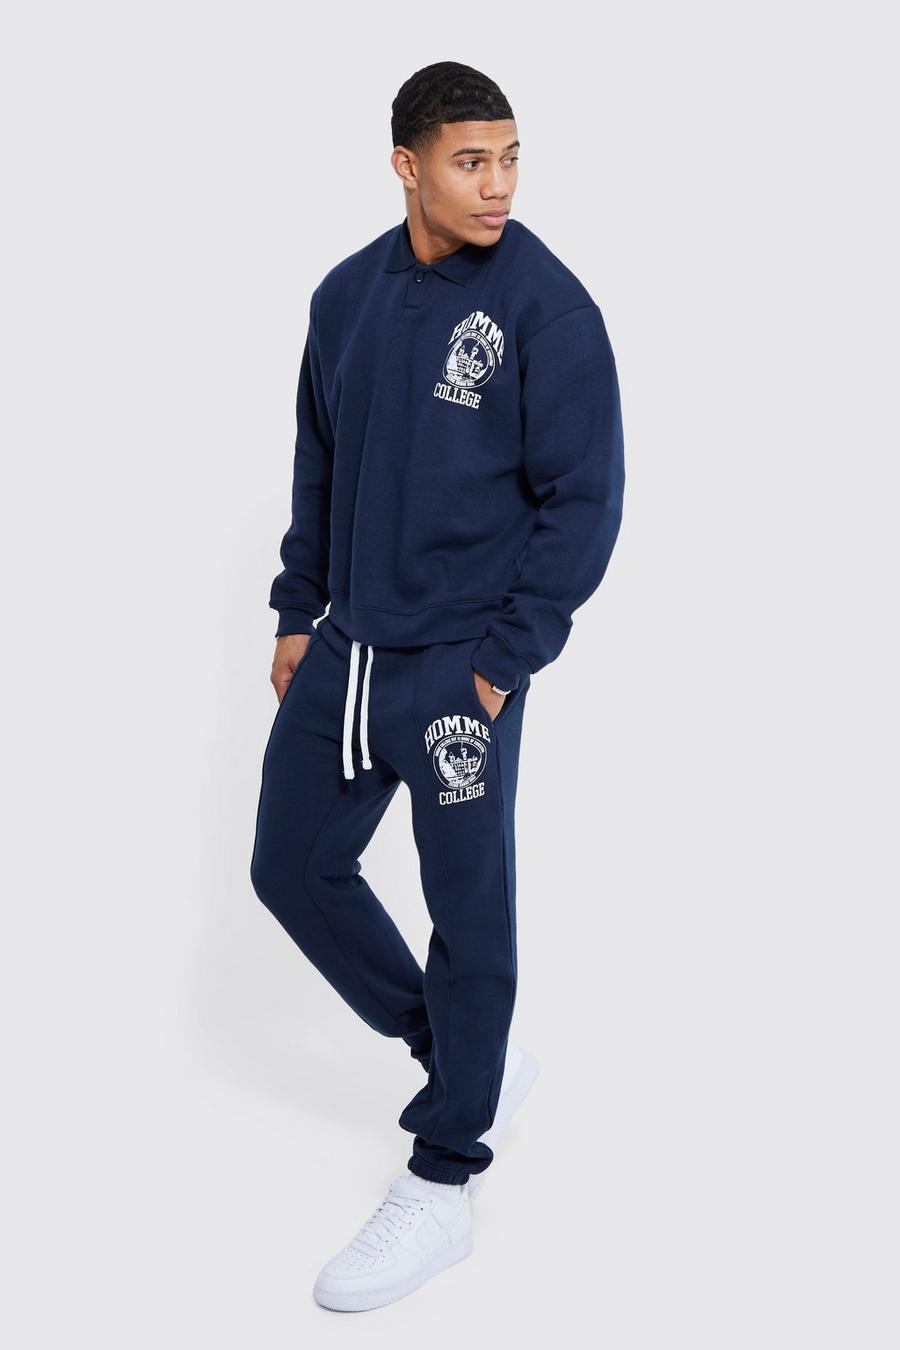 Navy blu oltremare Oversized Homme Rugby Polo Tracksuit